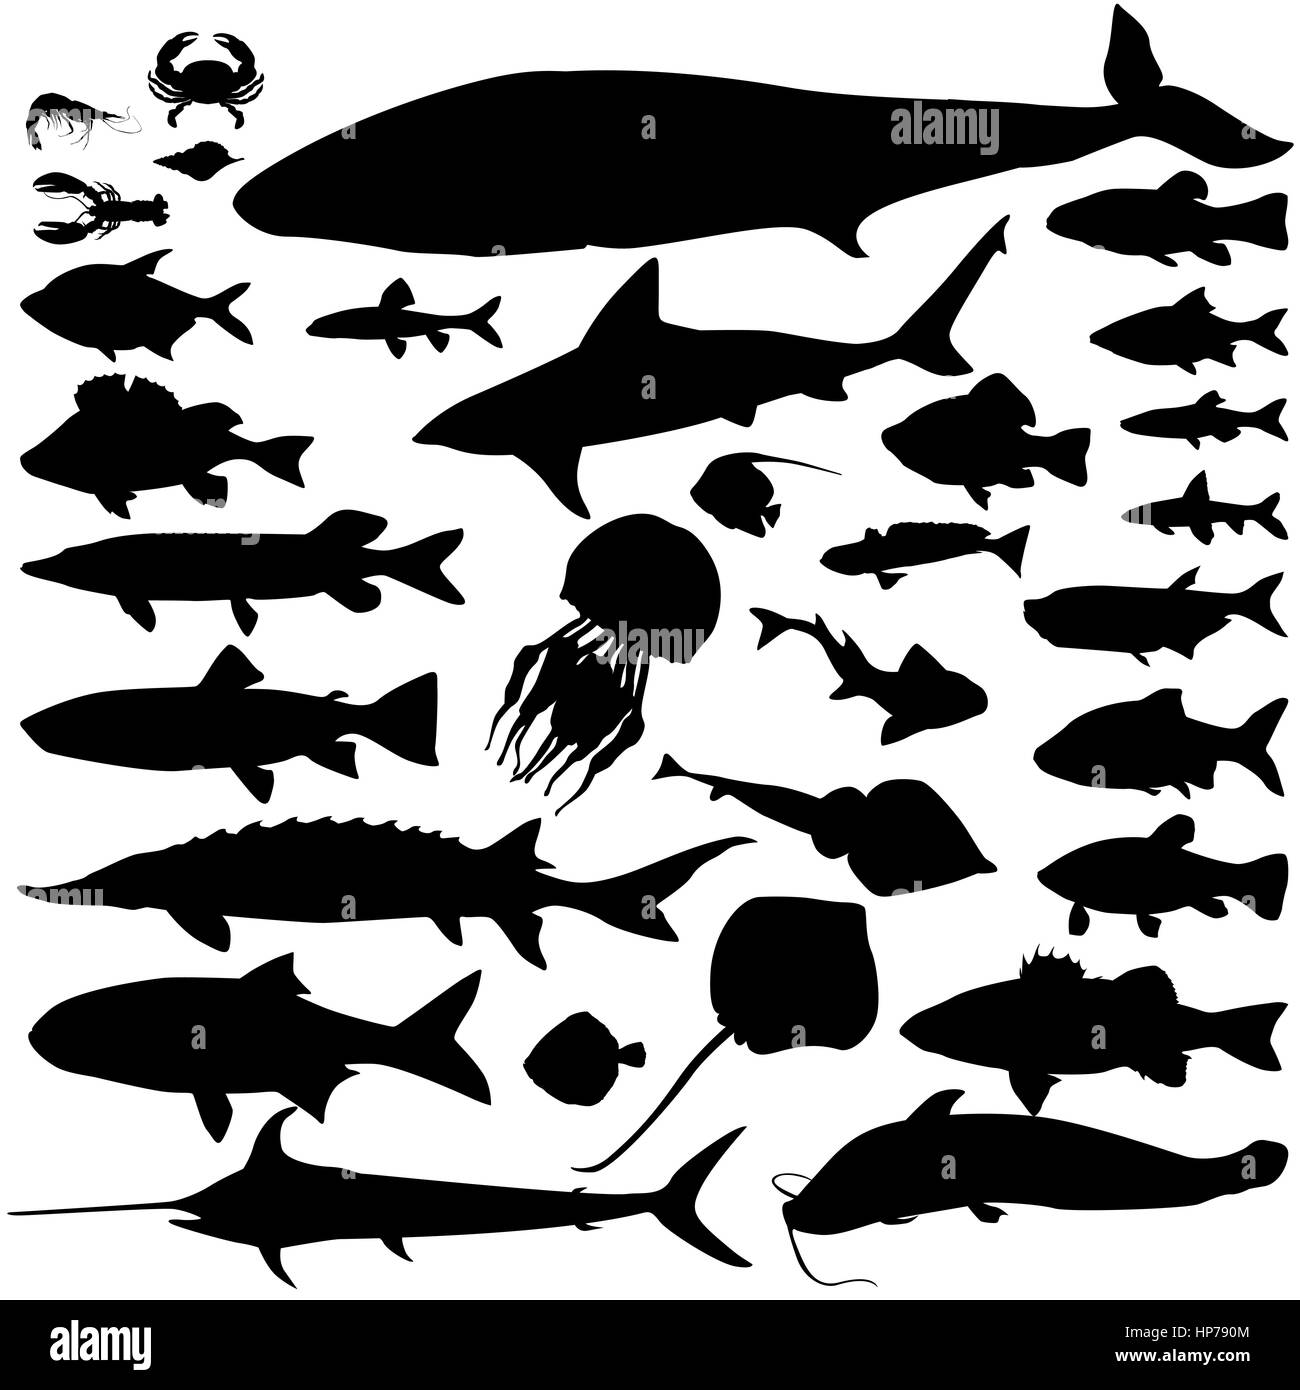 River, sea fish food silhouette set. Marine fish and mammals. Seafood icon collection. Ocean underwater wildlife signs Stock Vector